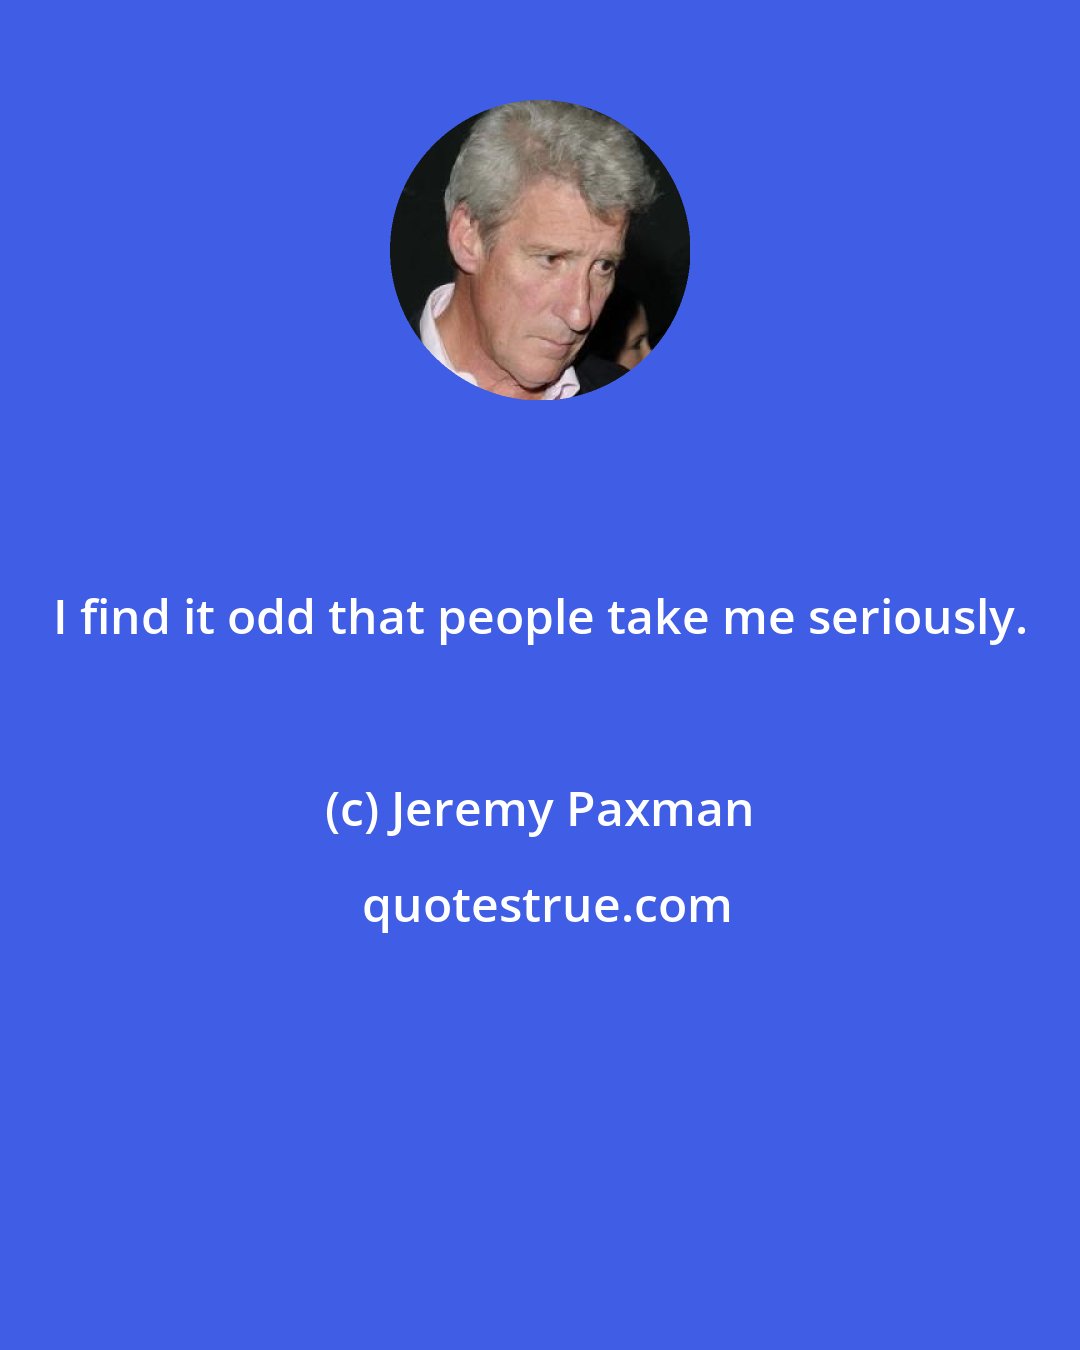 Jeremy Paxman: I find it odd that people take me seriously.